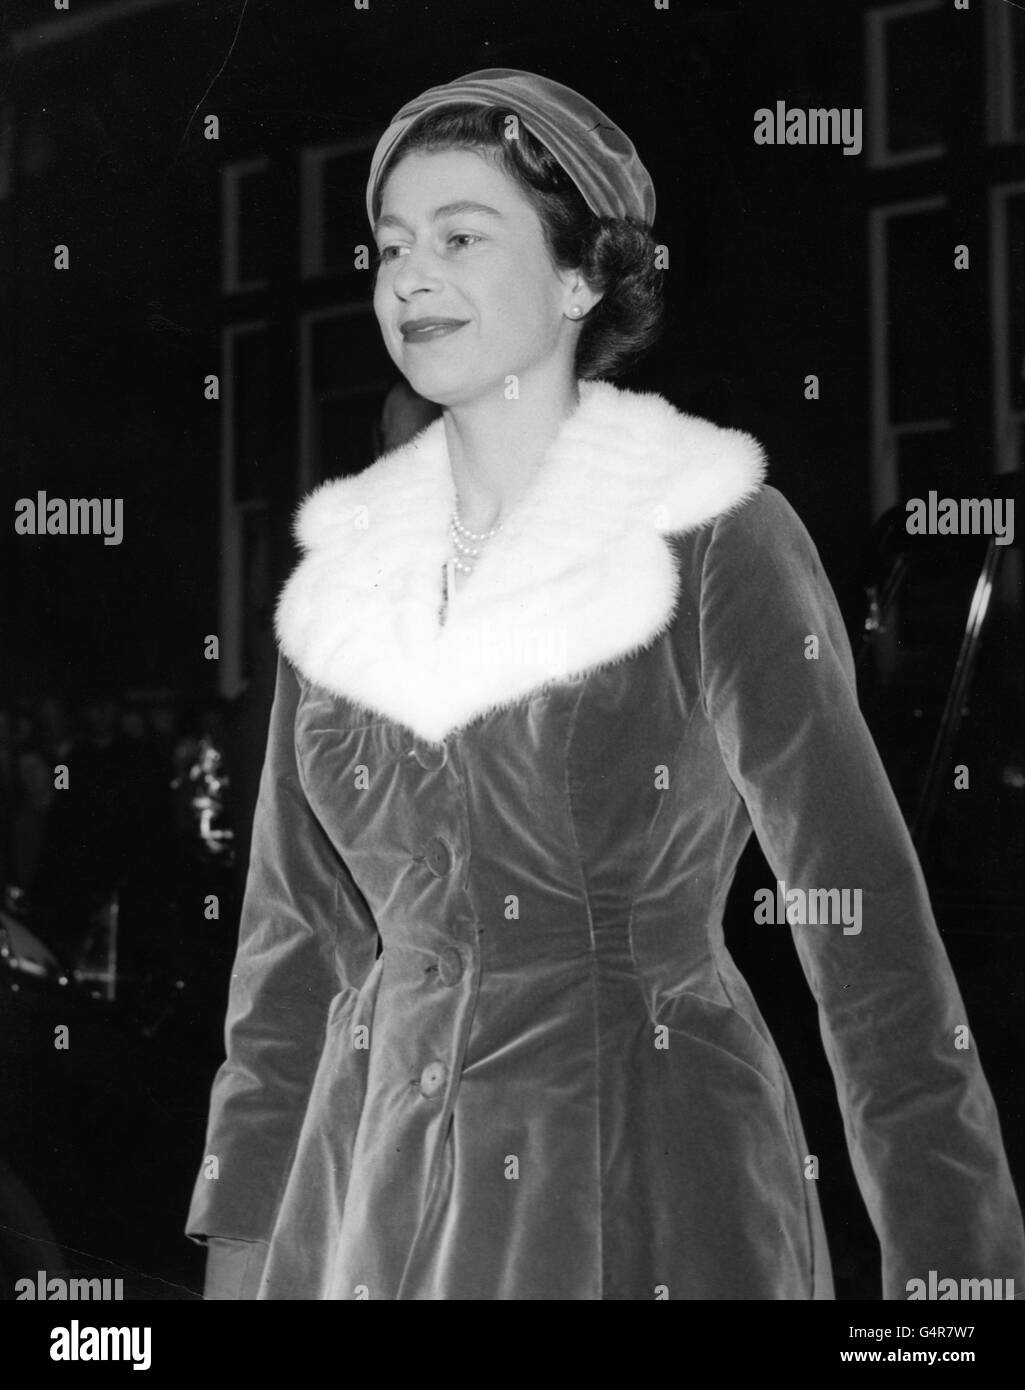 Queen Elizabeth II, who is Sovereign of the Order, arriving at the Queen's Chapel of the Savoy, London, for the Service of the Royal Victorian Order. Stock Photo